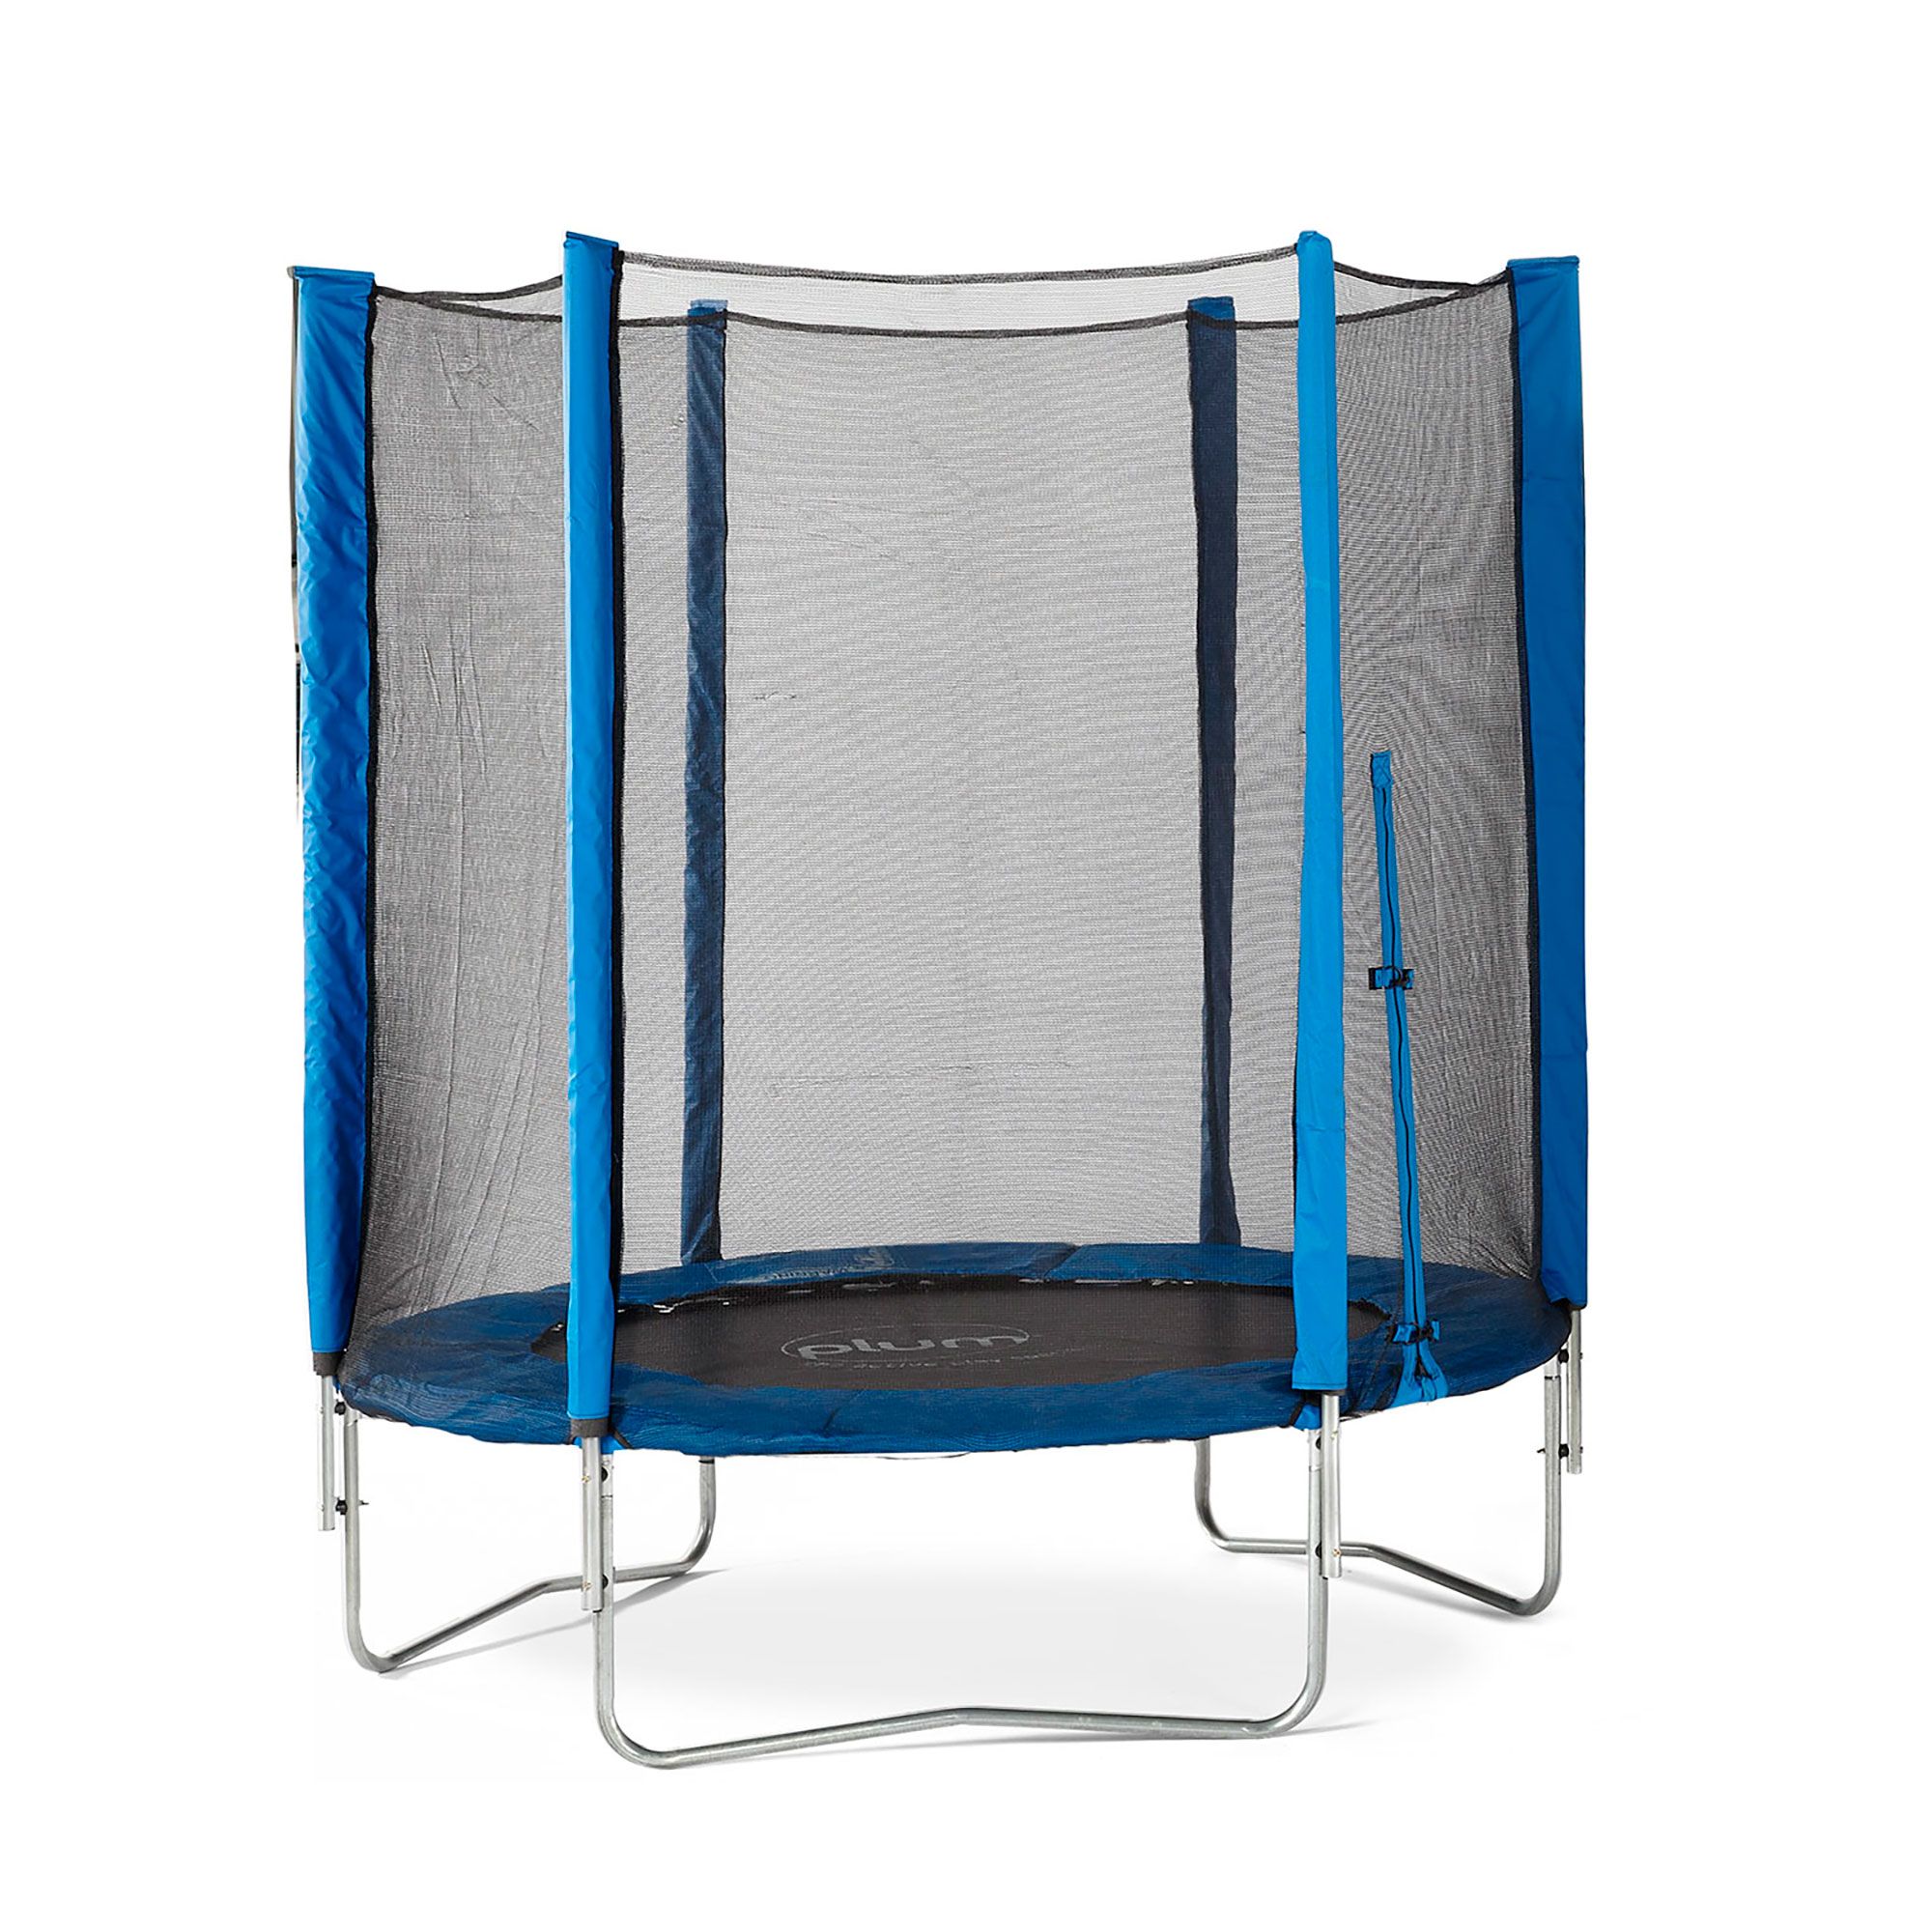 Plum Play 6ft Kids Trampoline with Enclosure Net in Blue